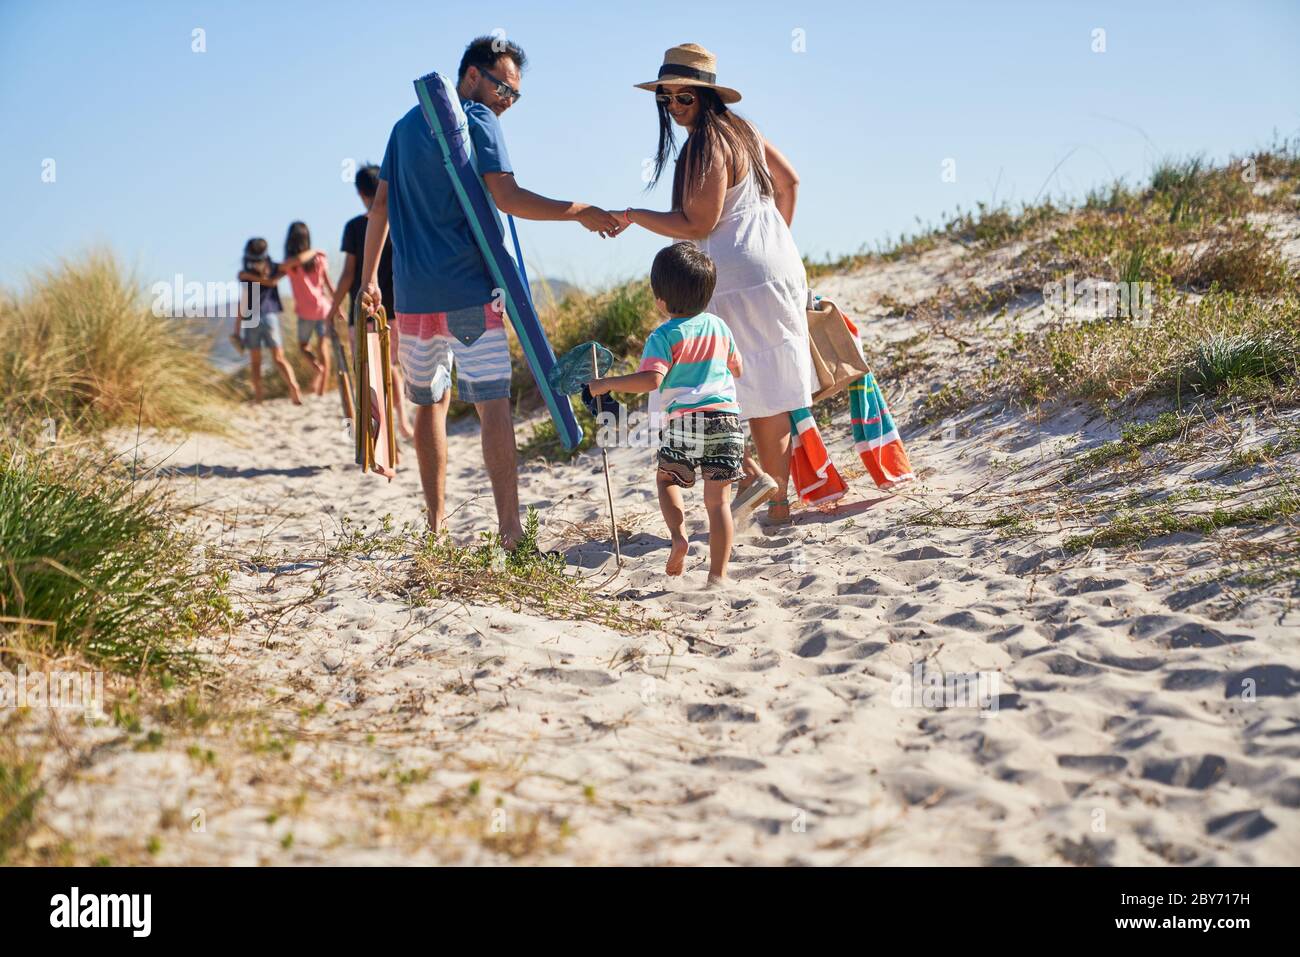 Family walking on sunny beach Banque D'Images